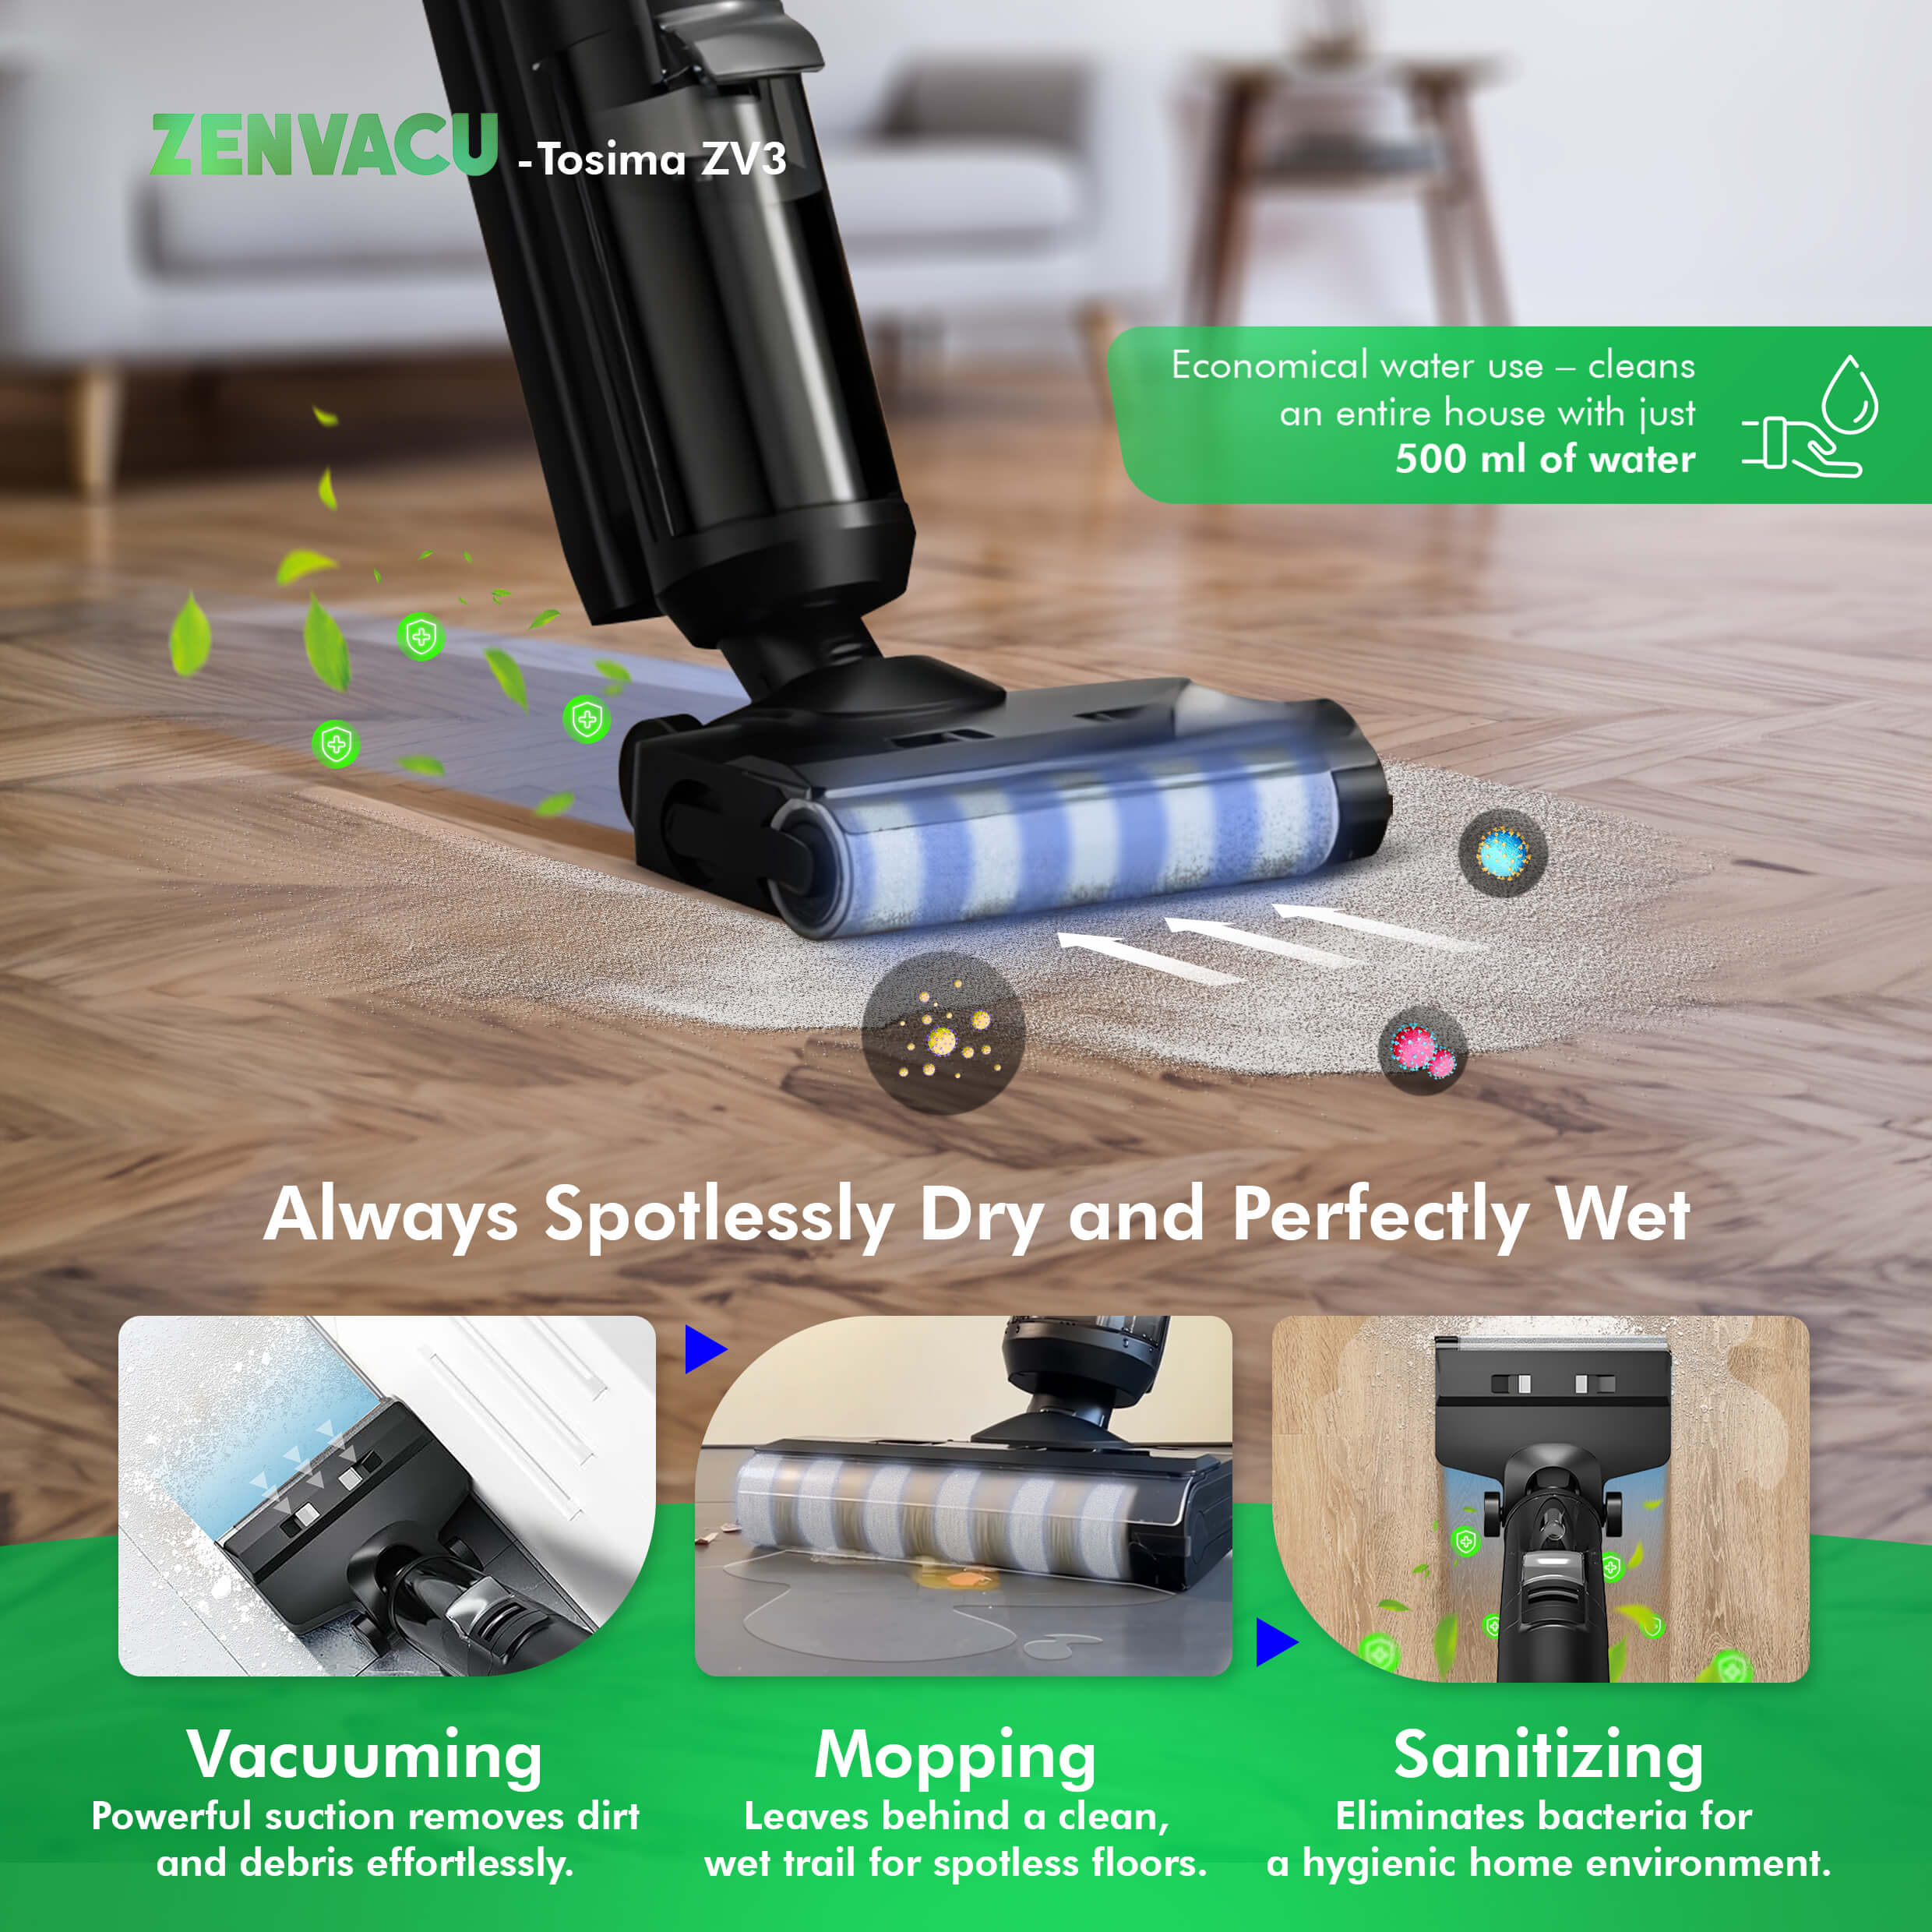 Best ZenVacu 3-in-1 Vacuum: Eco-Friendly, Efficient Floor Cleaning with Vacuuming, Mopping, and Sanitizing All in One, Always Spotlessly Dry and Perfectly Wet